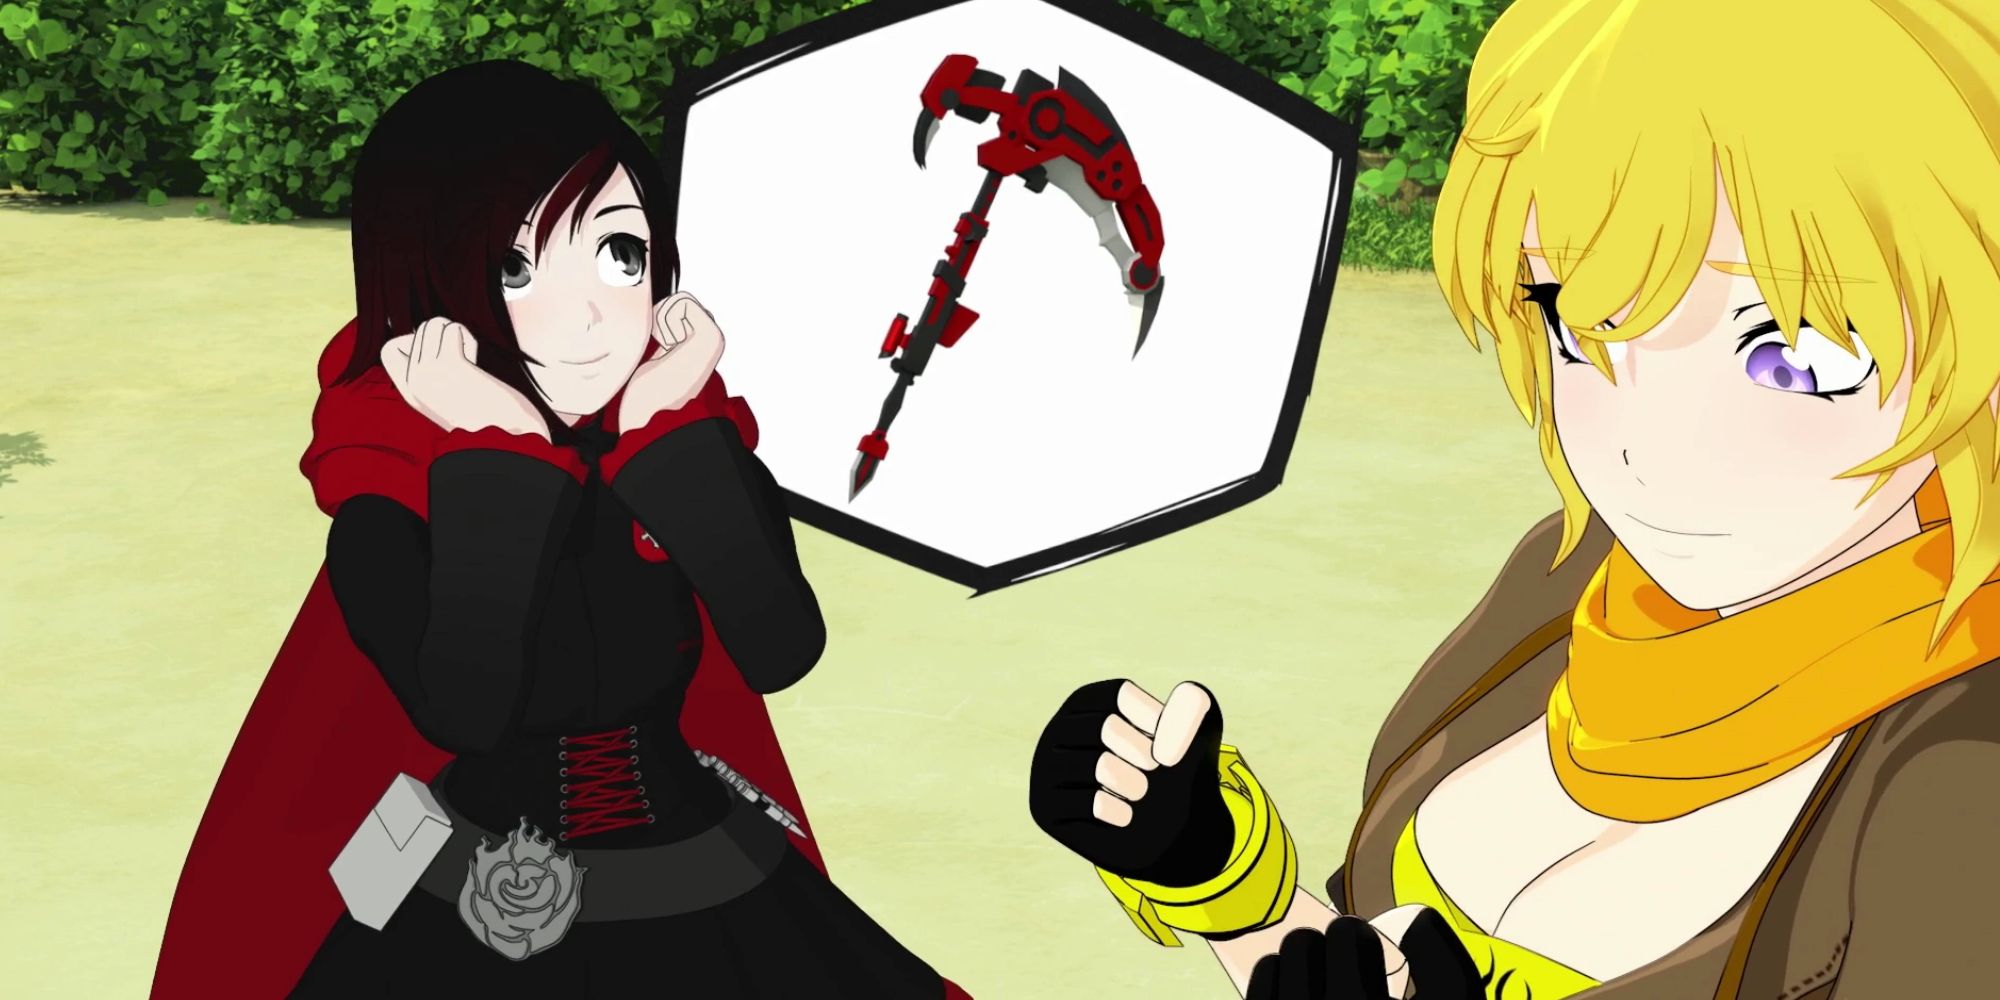 Ruby Dreaming Of Crescent Rose In A Yang Character Short For RWBY